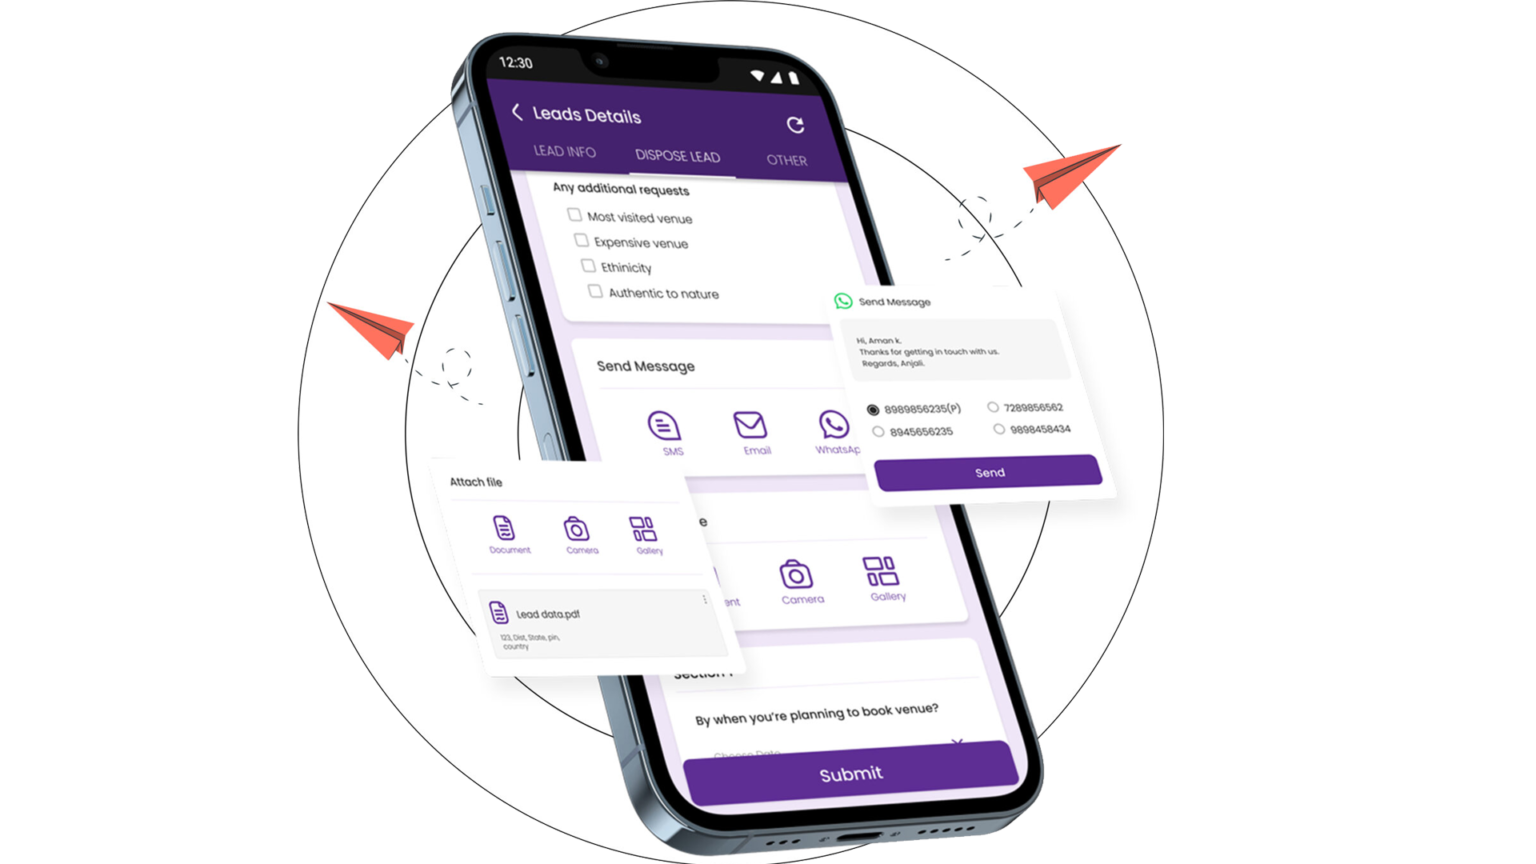 Engage your leads and customers wherever they are with call, WhatsApp, SMS or email – without skipping a beat. On NeoDove, get the essentials you need for building a foolproof engagement strategy and driving sales. 